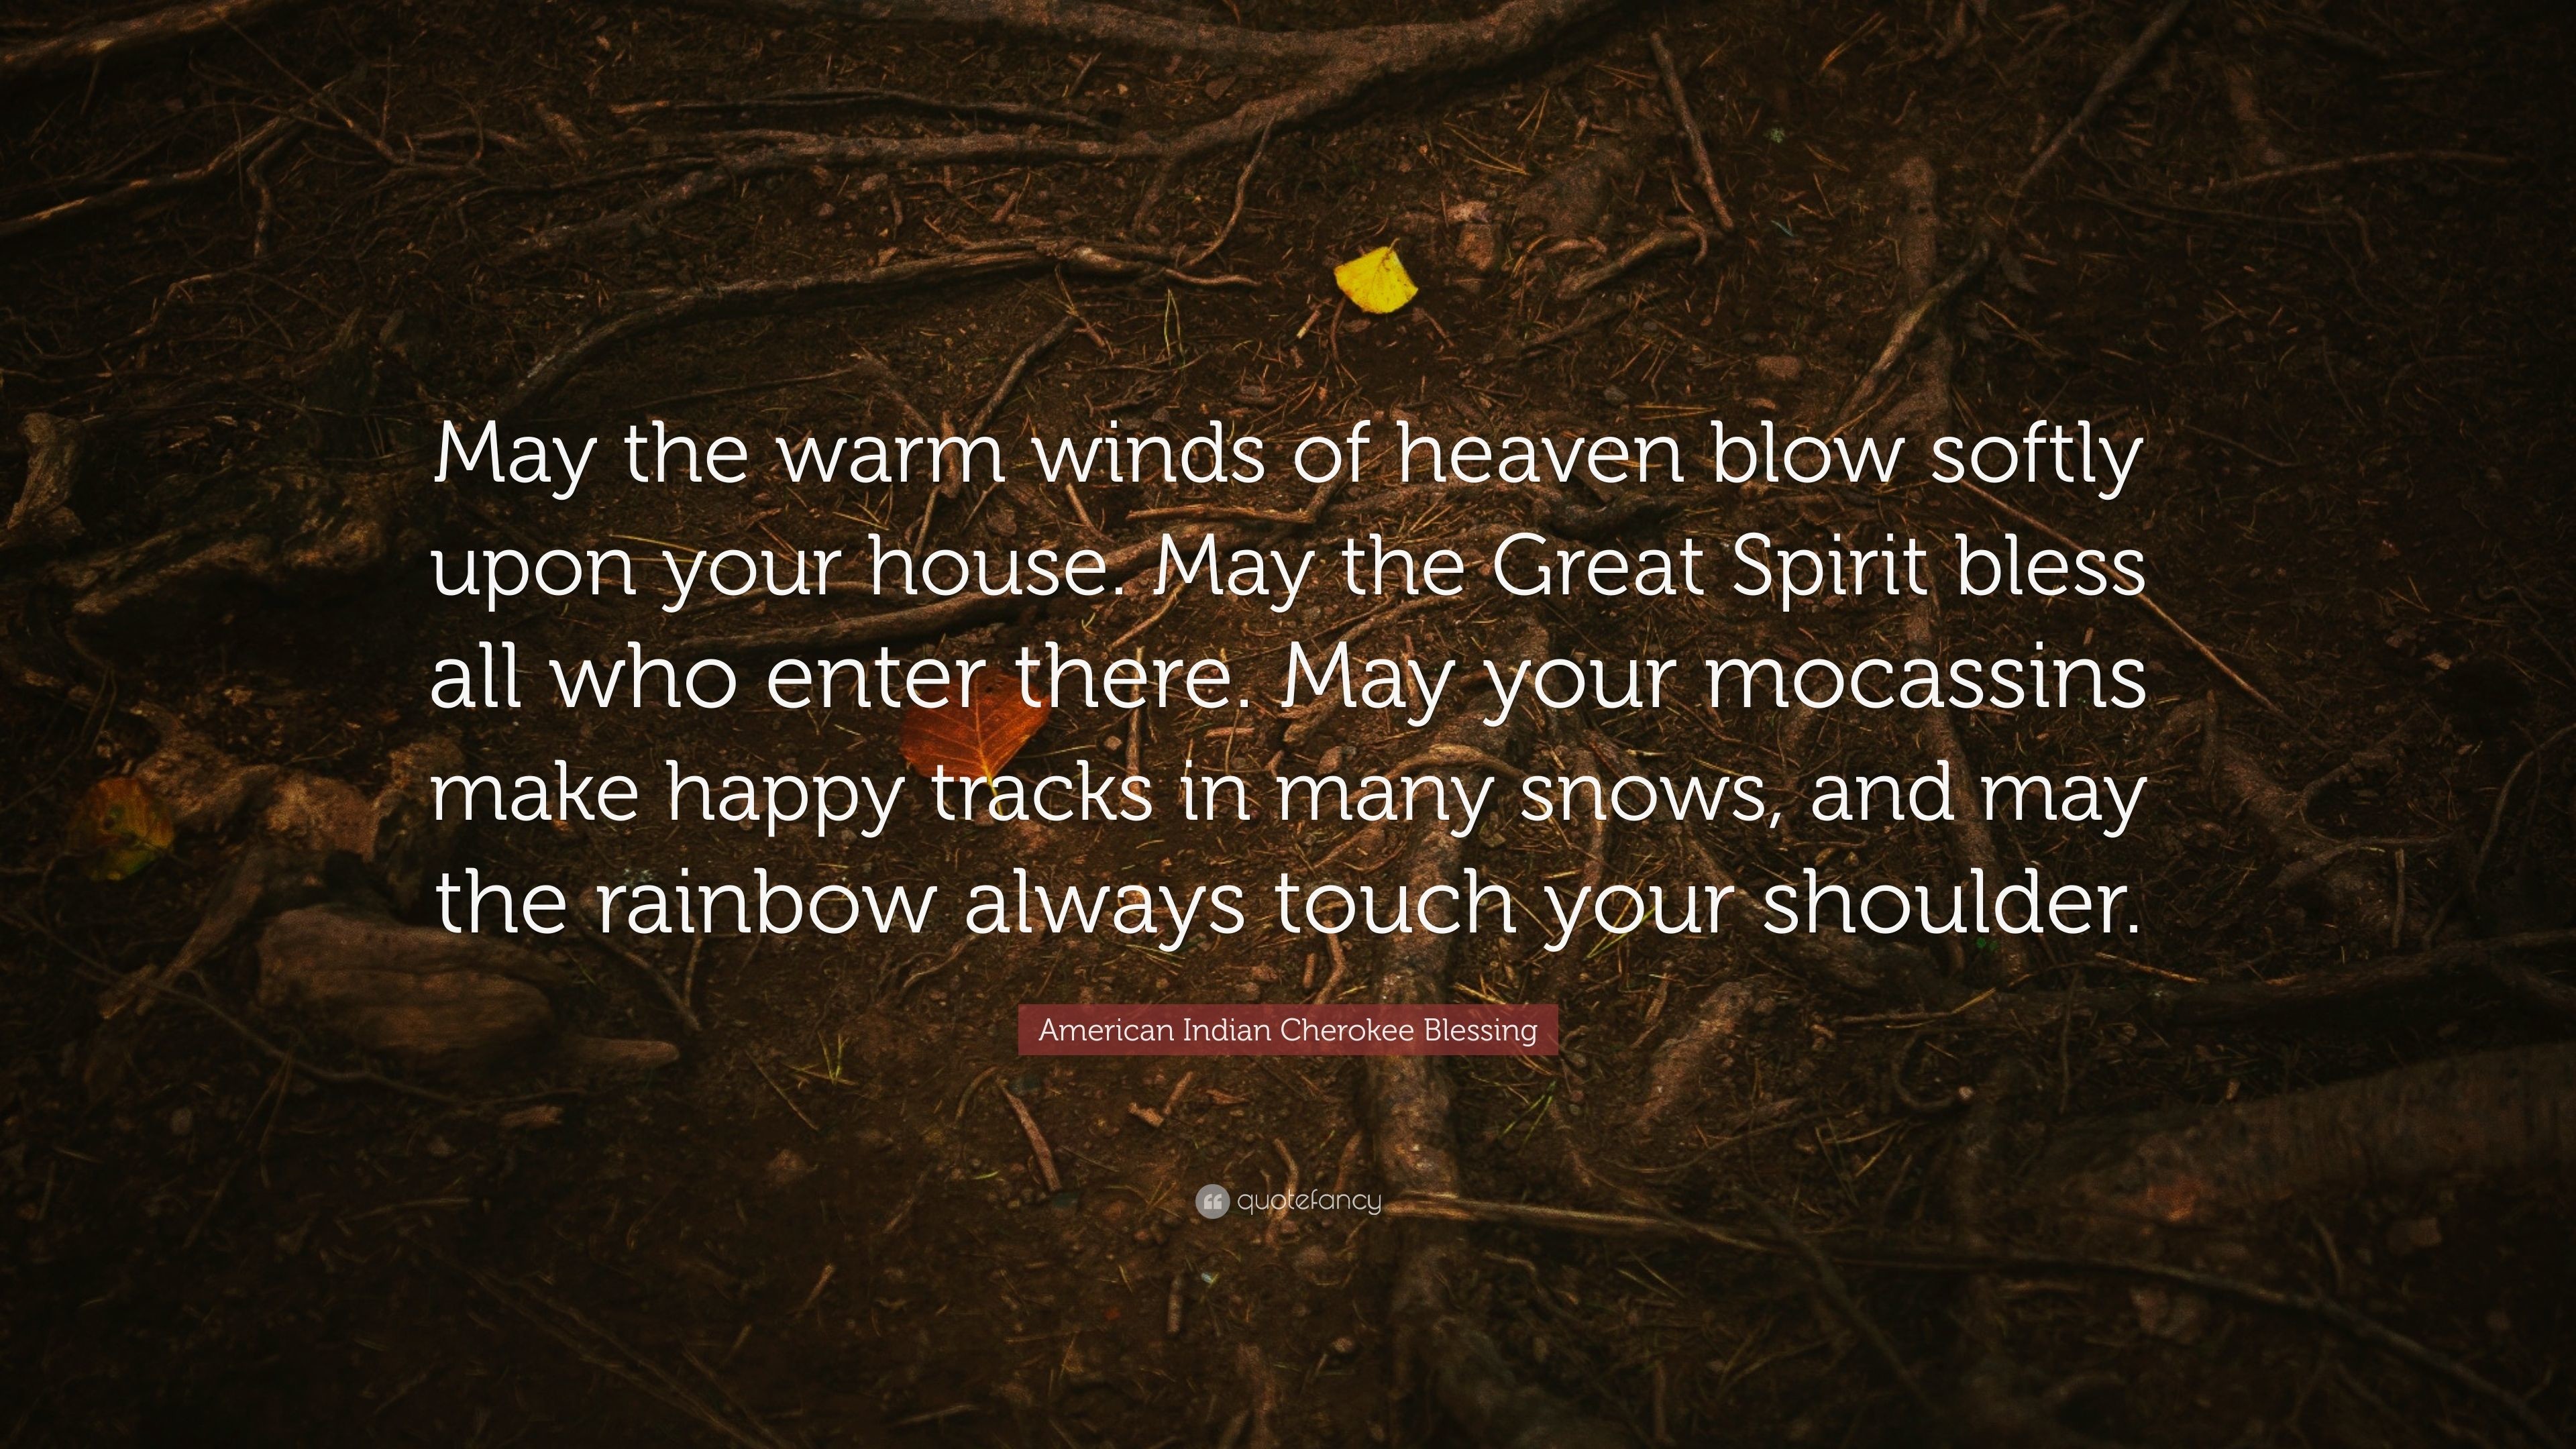 3840x2160 American Indian Cherokee Blessing Quote: “May the warm winds of heaven blow  softly upon